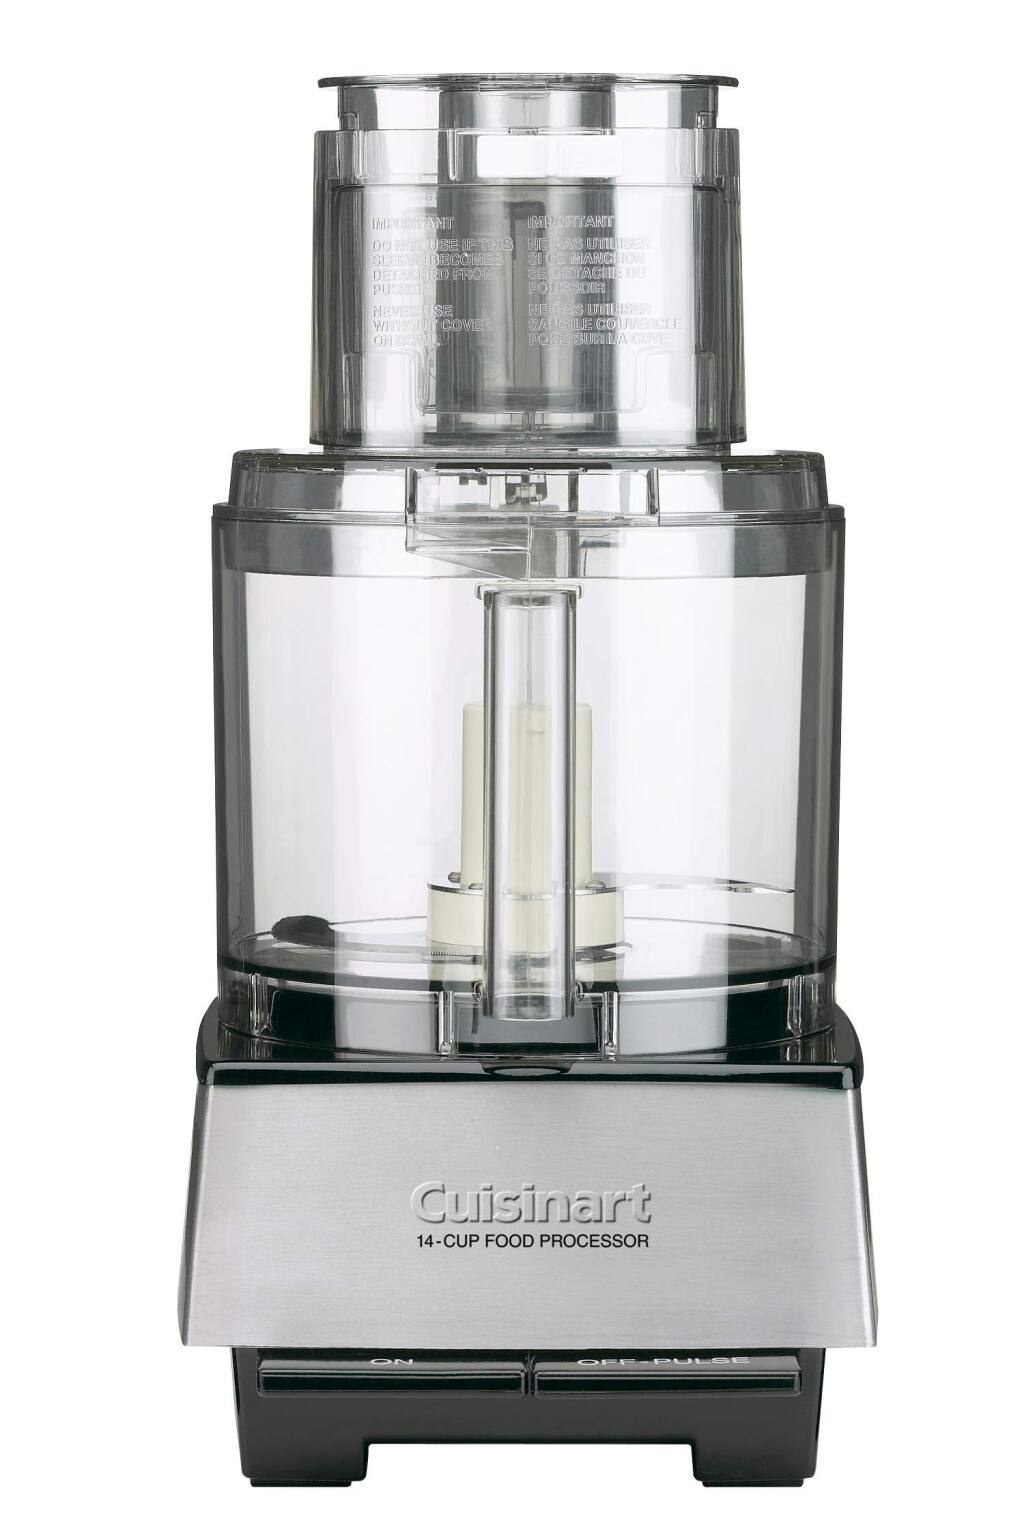 Cuisinart recalls 8 million food processors after reports of blade breaking  off